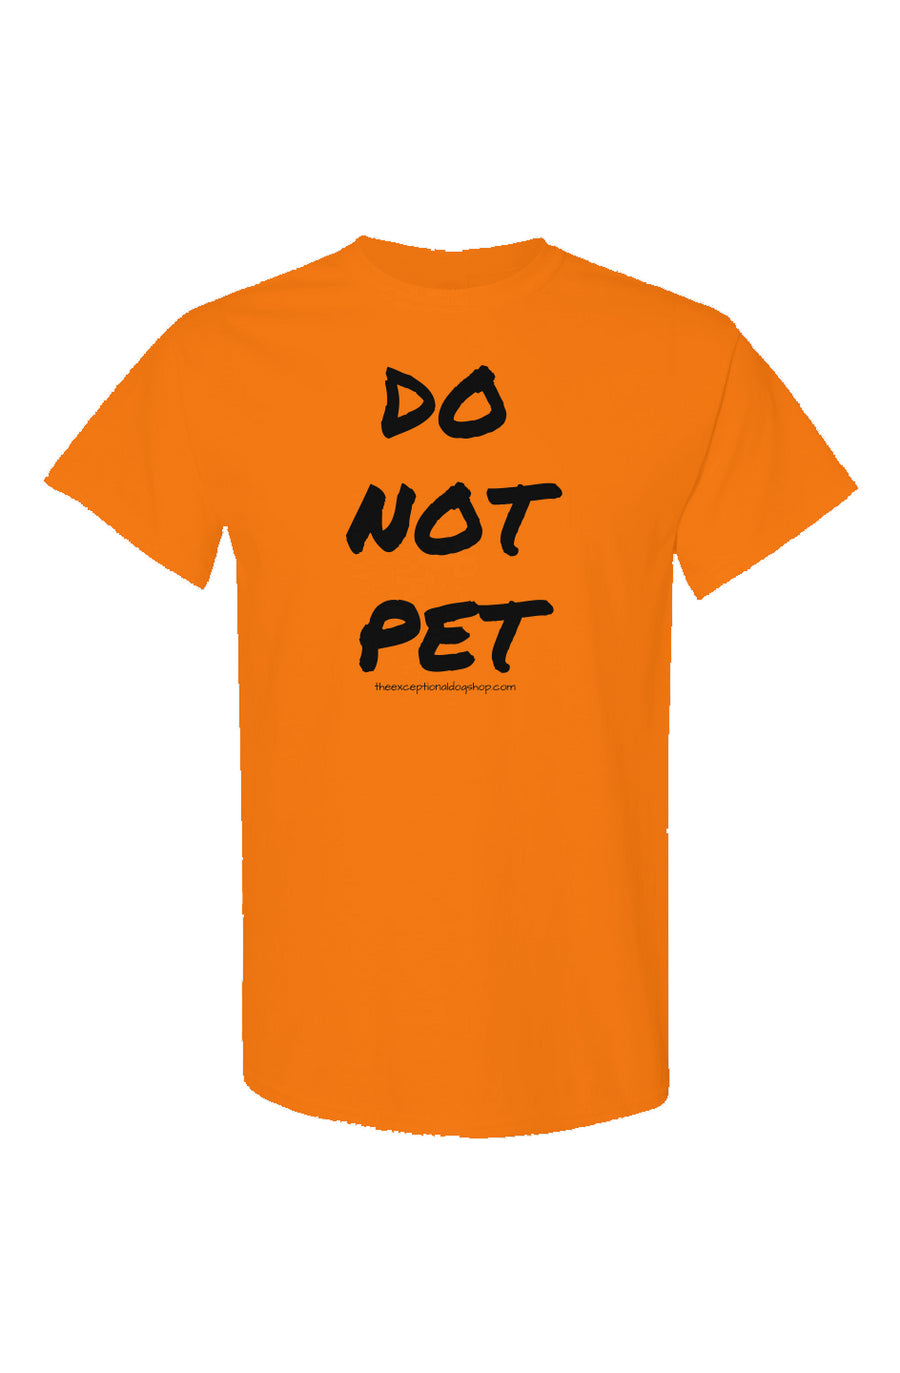 High visibility neon orange training t shirt with the text do not pet in large lettering on the front of the shirt.